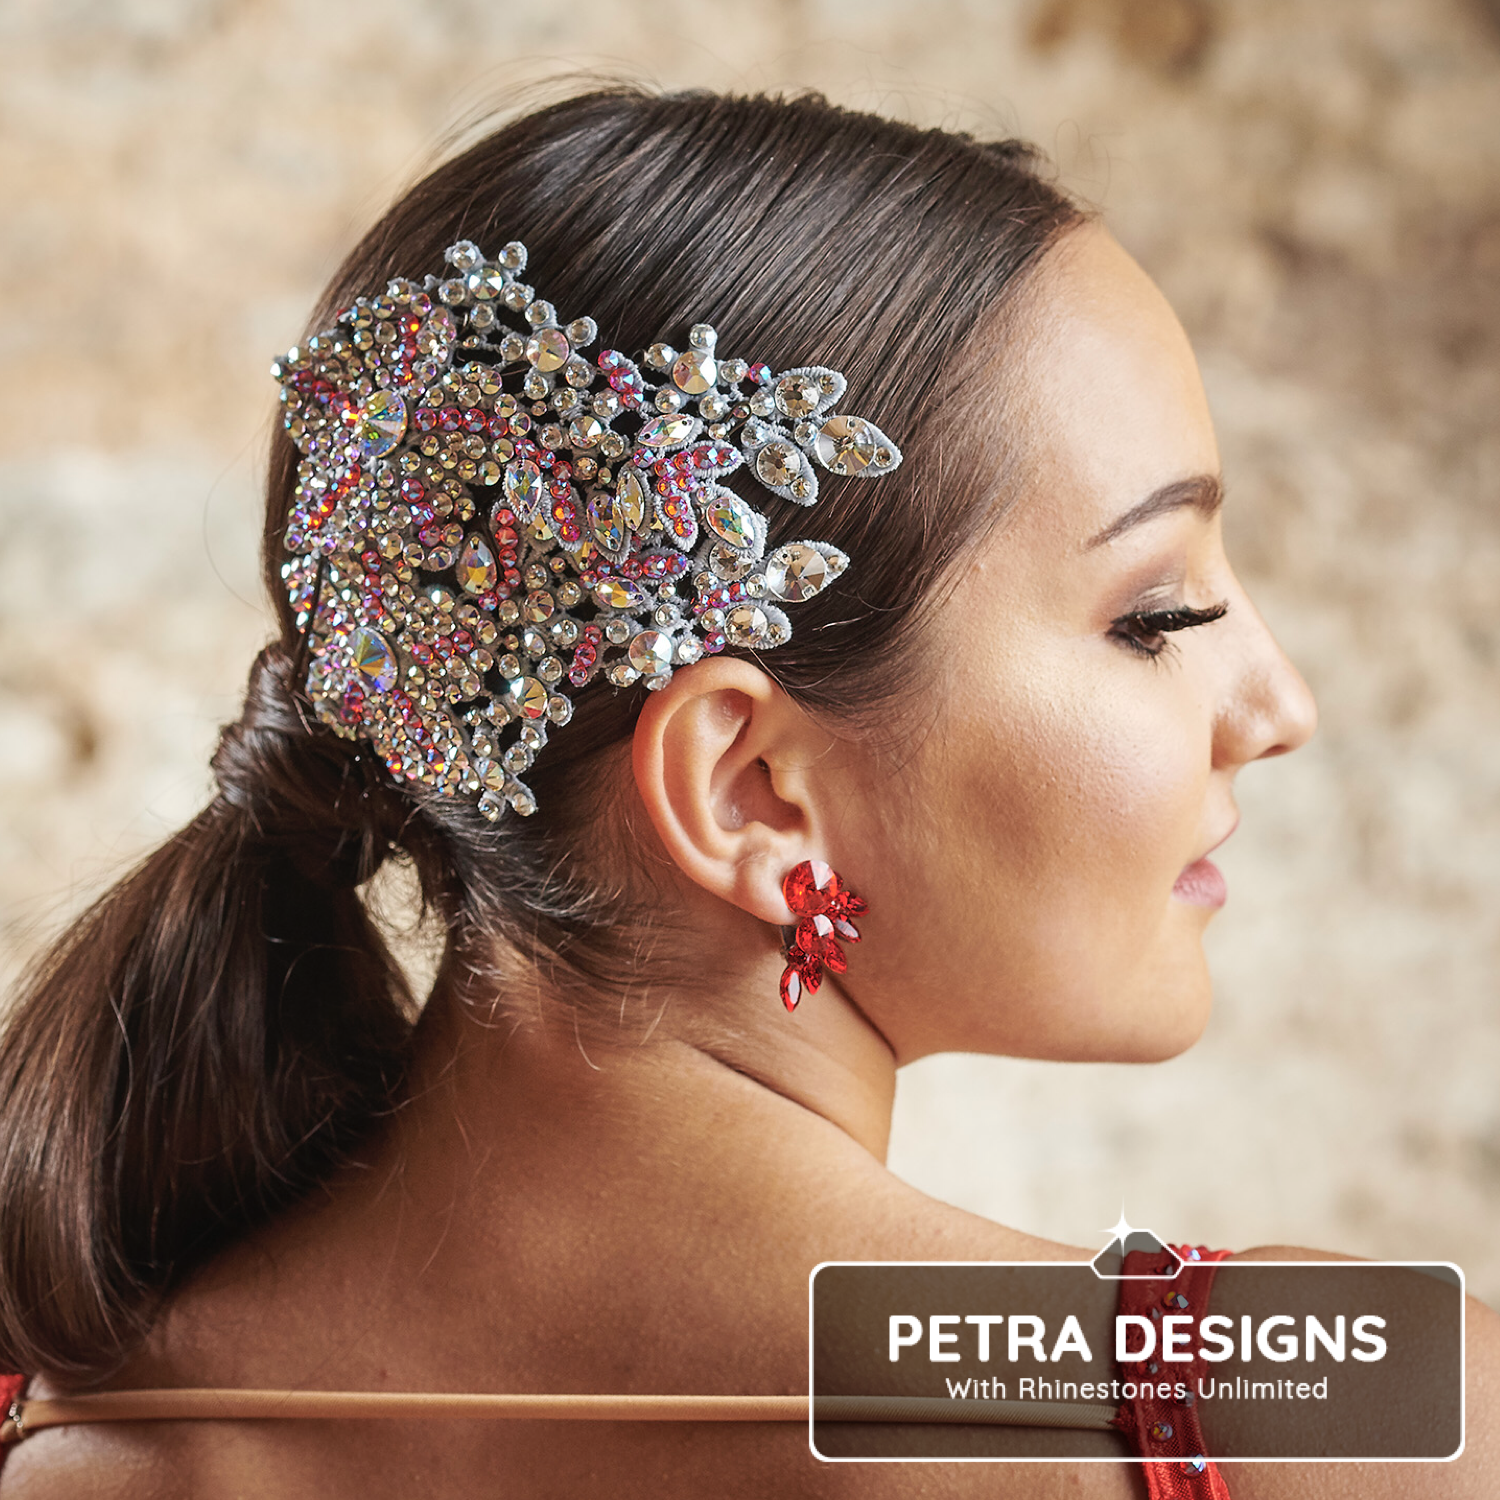 Petra Designs with Rhinestones Unlimited